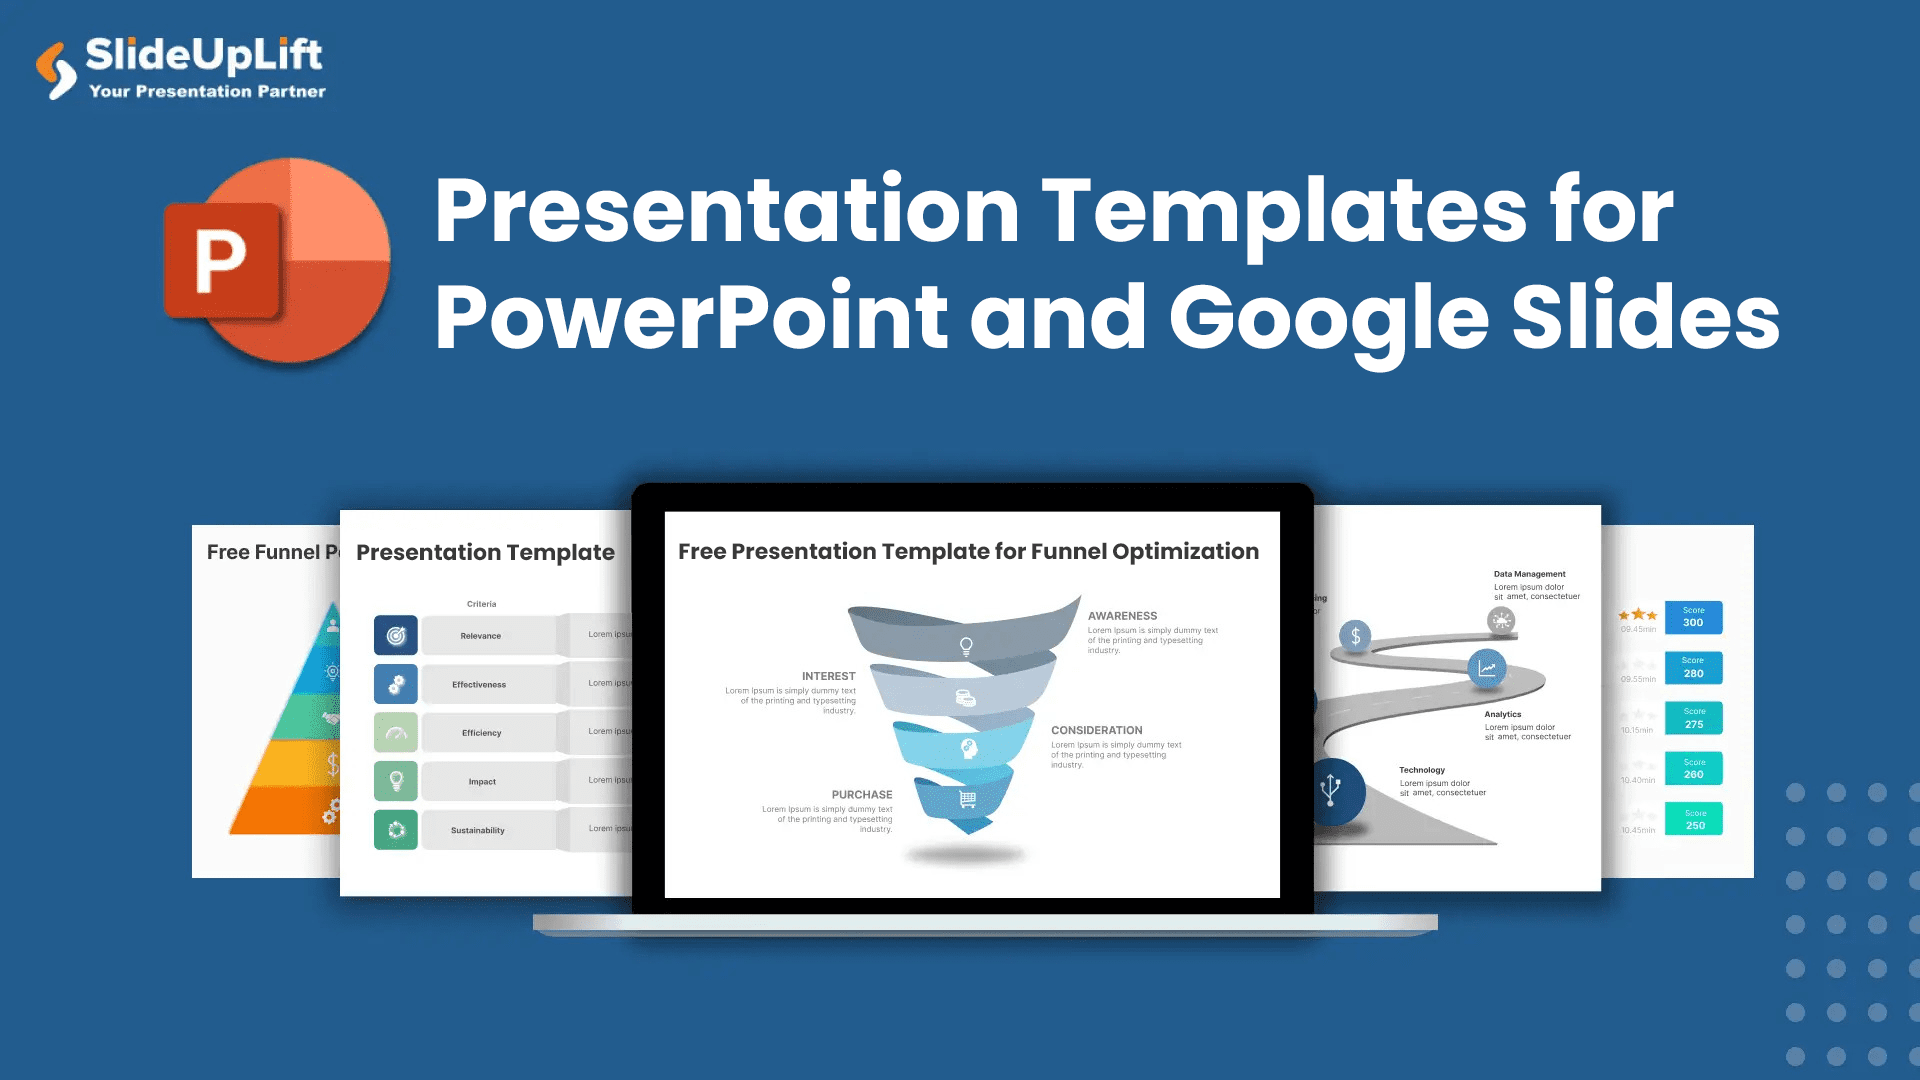 Interactive Board game. Free PowerPoint template & Google Slides